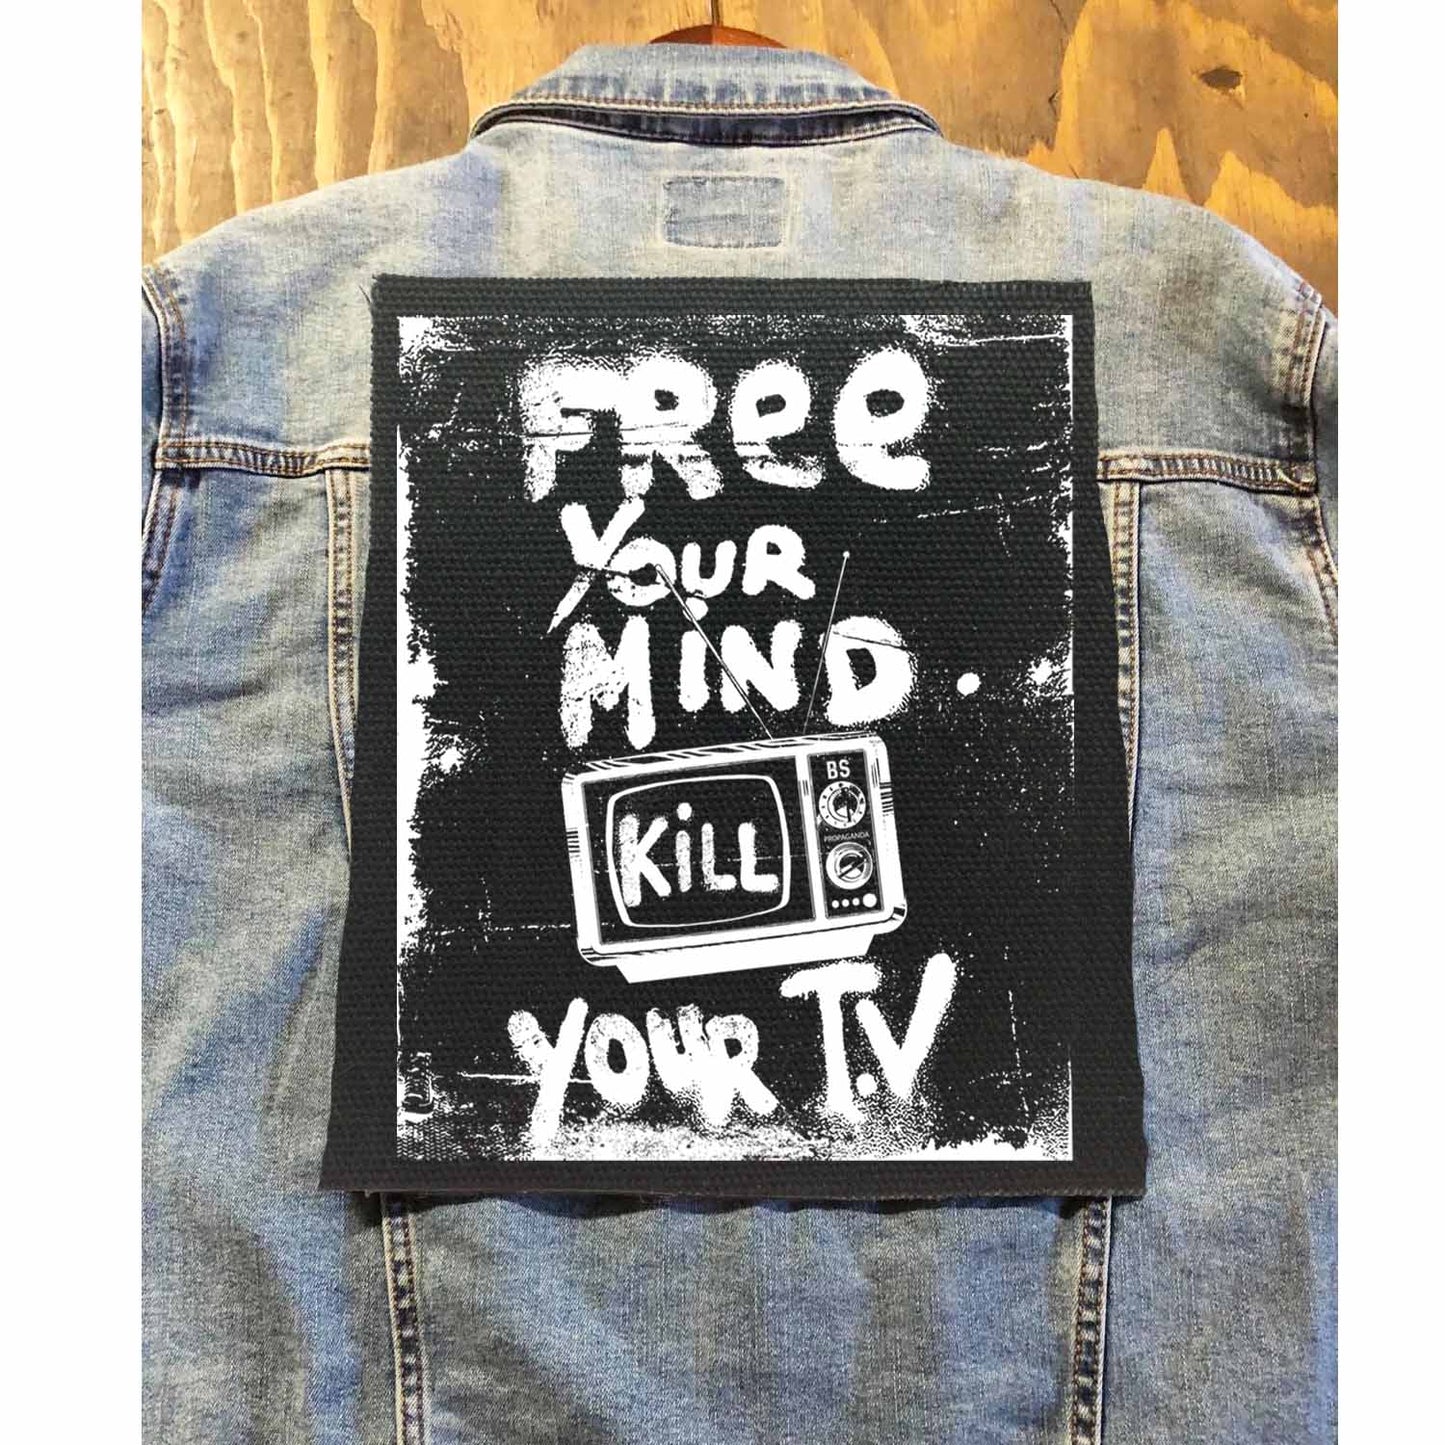 Punk Protest Patch, Free Your Mind Kill Your TV